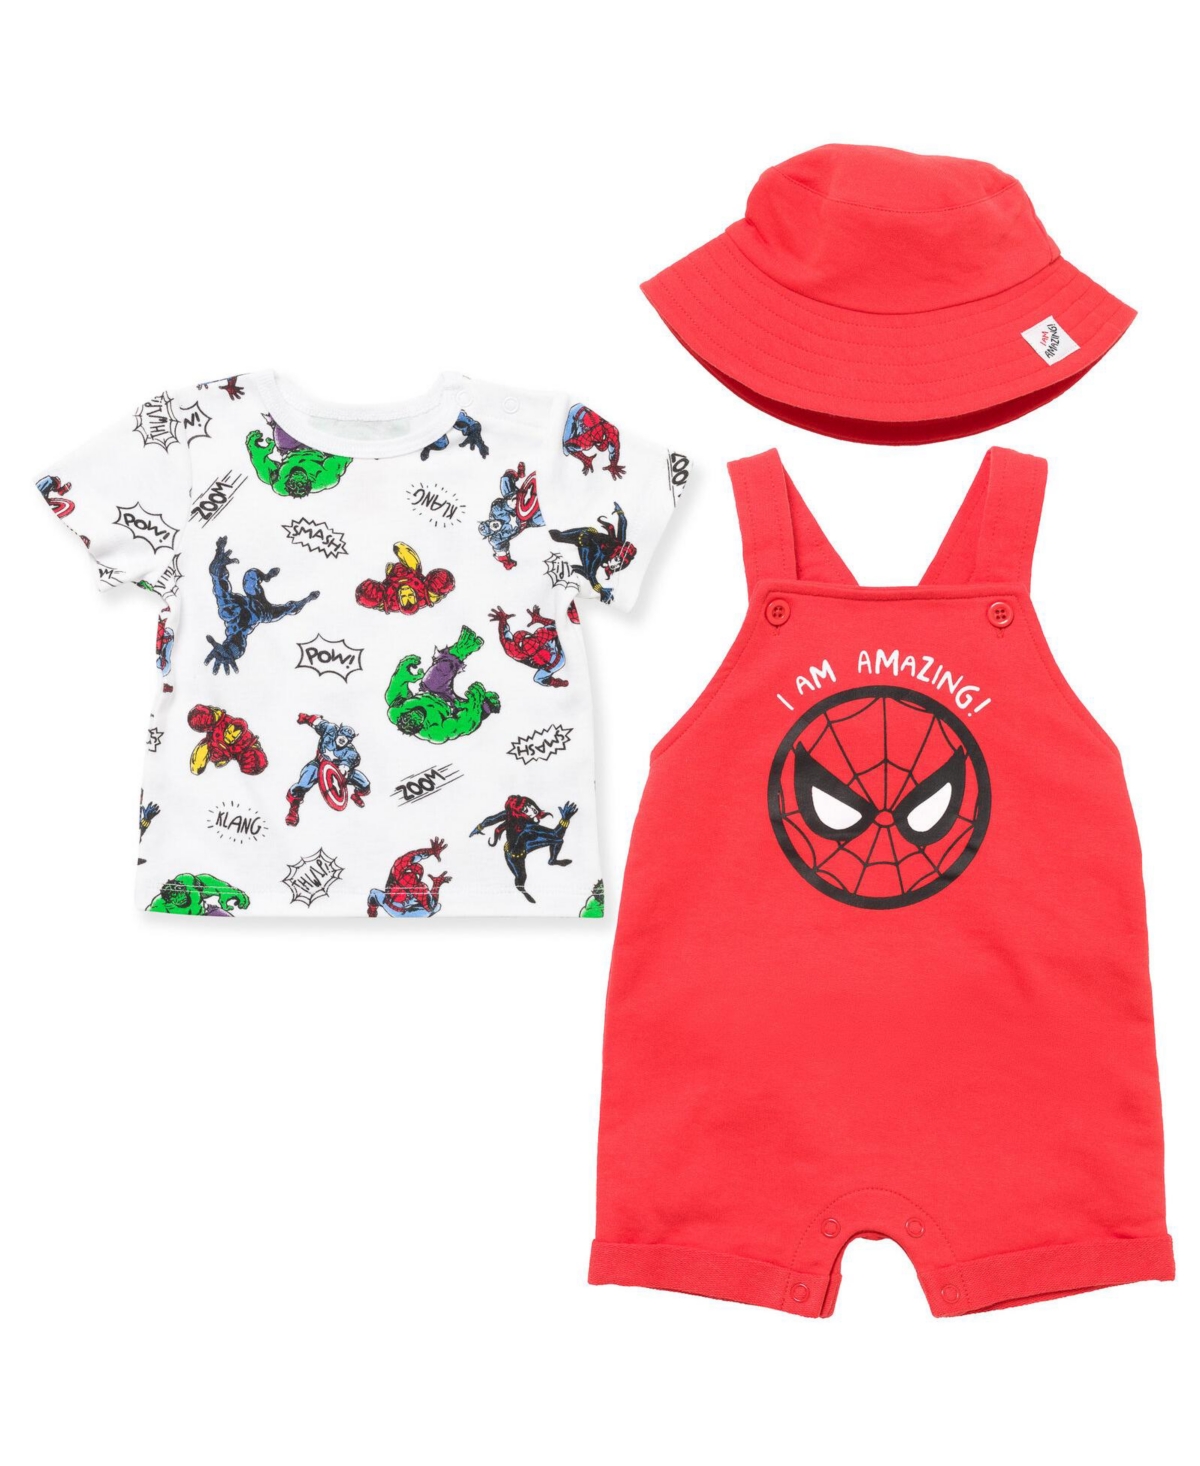 Marvel Babies' Avengers Spider-man Boys French Terry Short Overalls T-shirt & Hat 3 Pc Outfit Set Red/white In Red,white